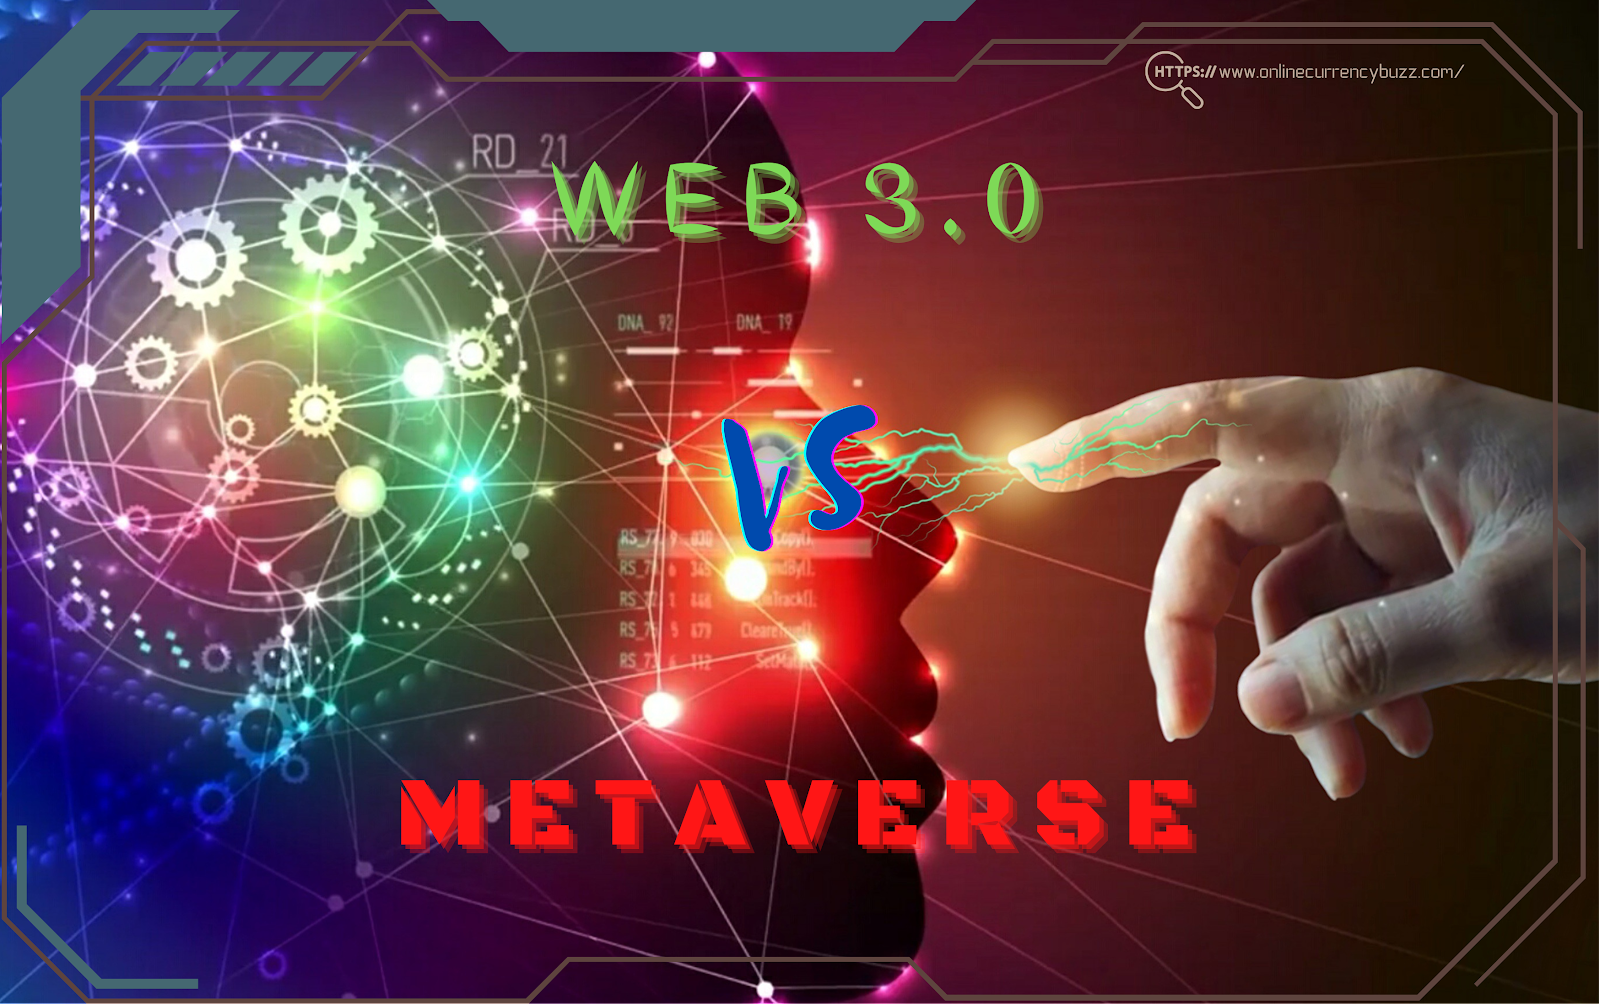 Relations between web 3.0 and metaverse